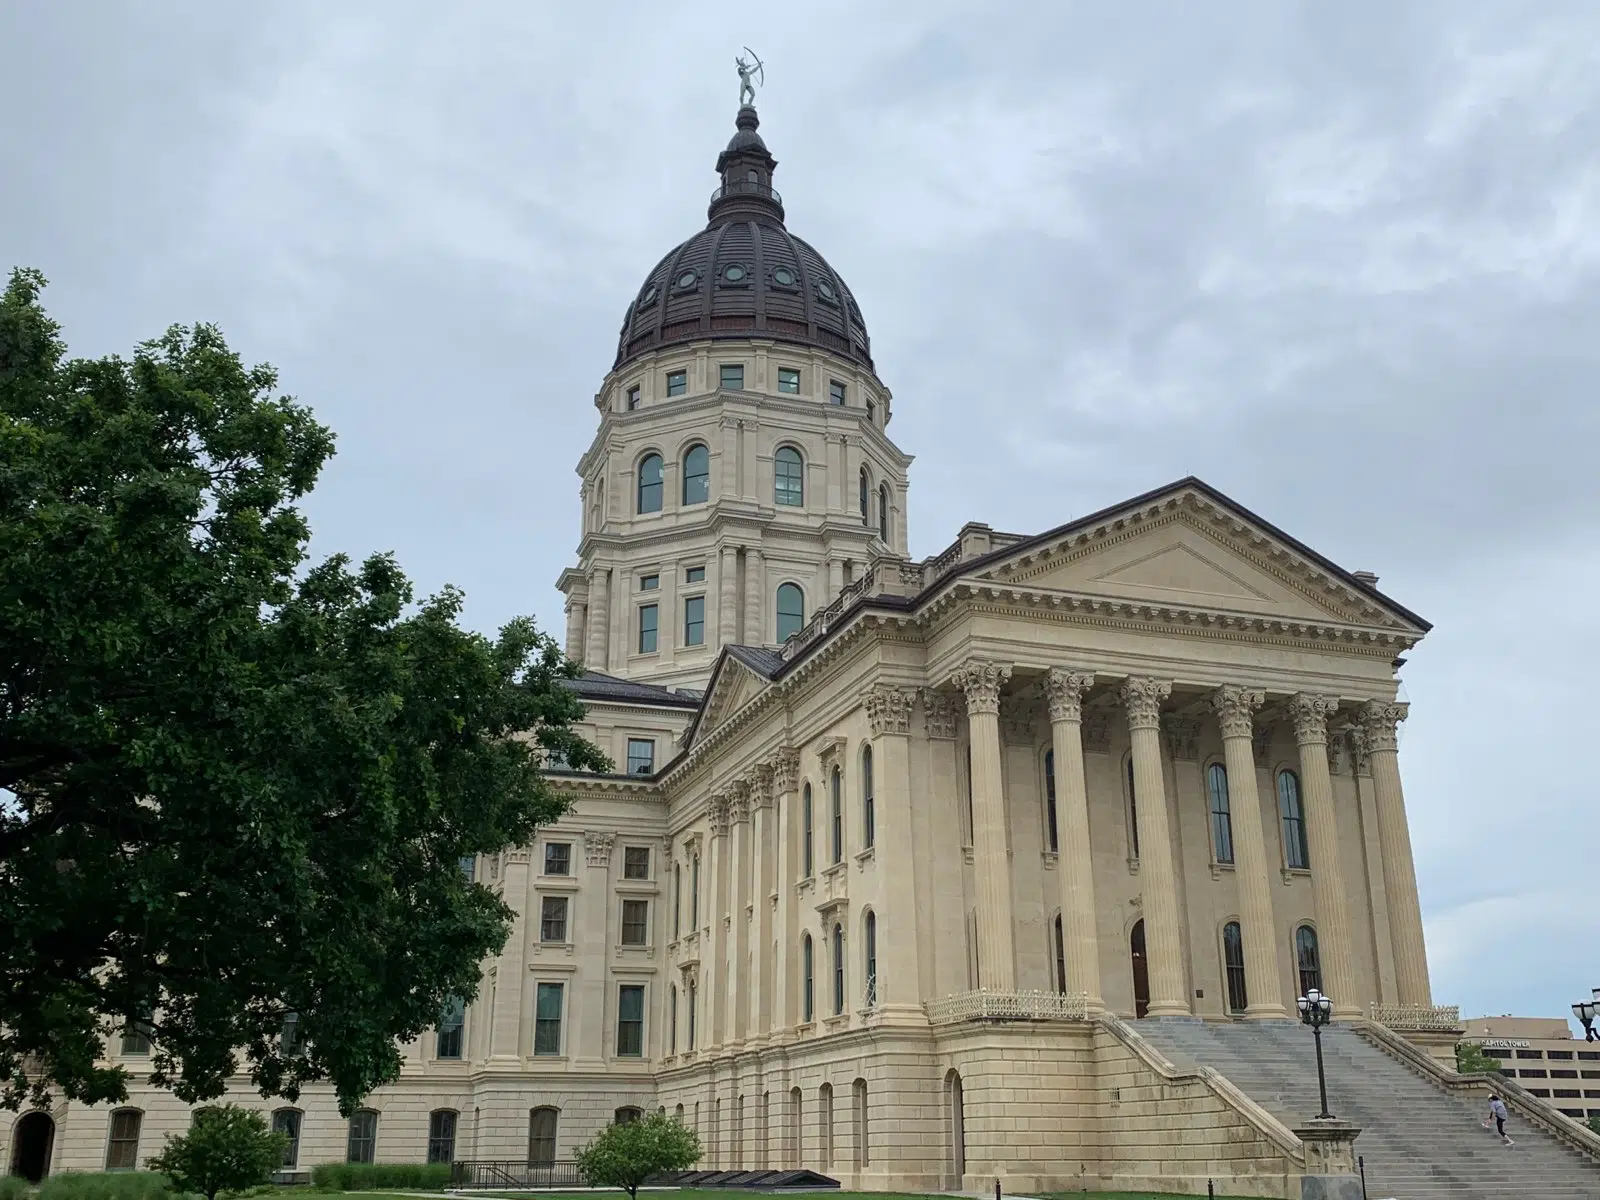 STATEHOUSE: Lawmakers representing Lyon County to be at final Legislative Dialogue, on KVOE airwaves next week